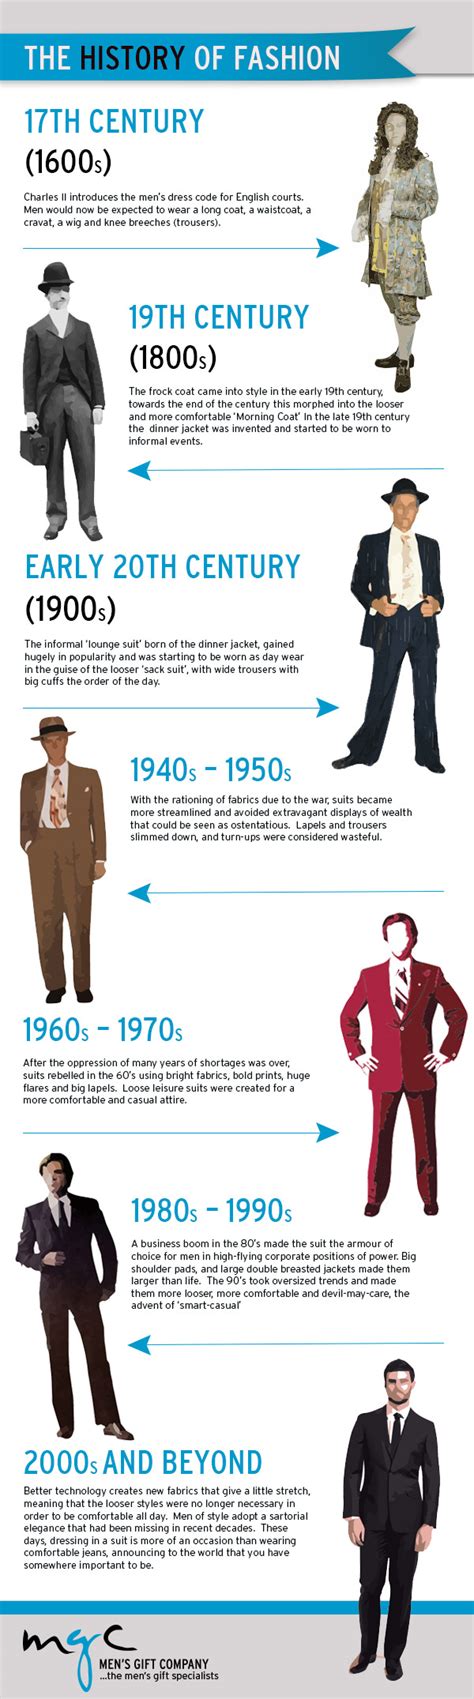 the history of fashion infographic ~ visualistan